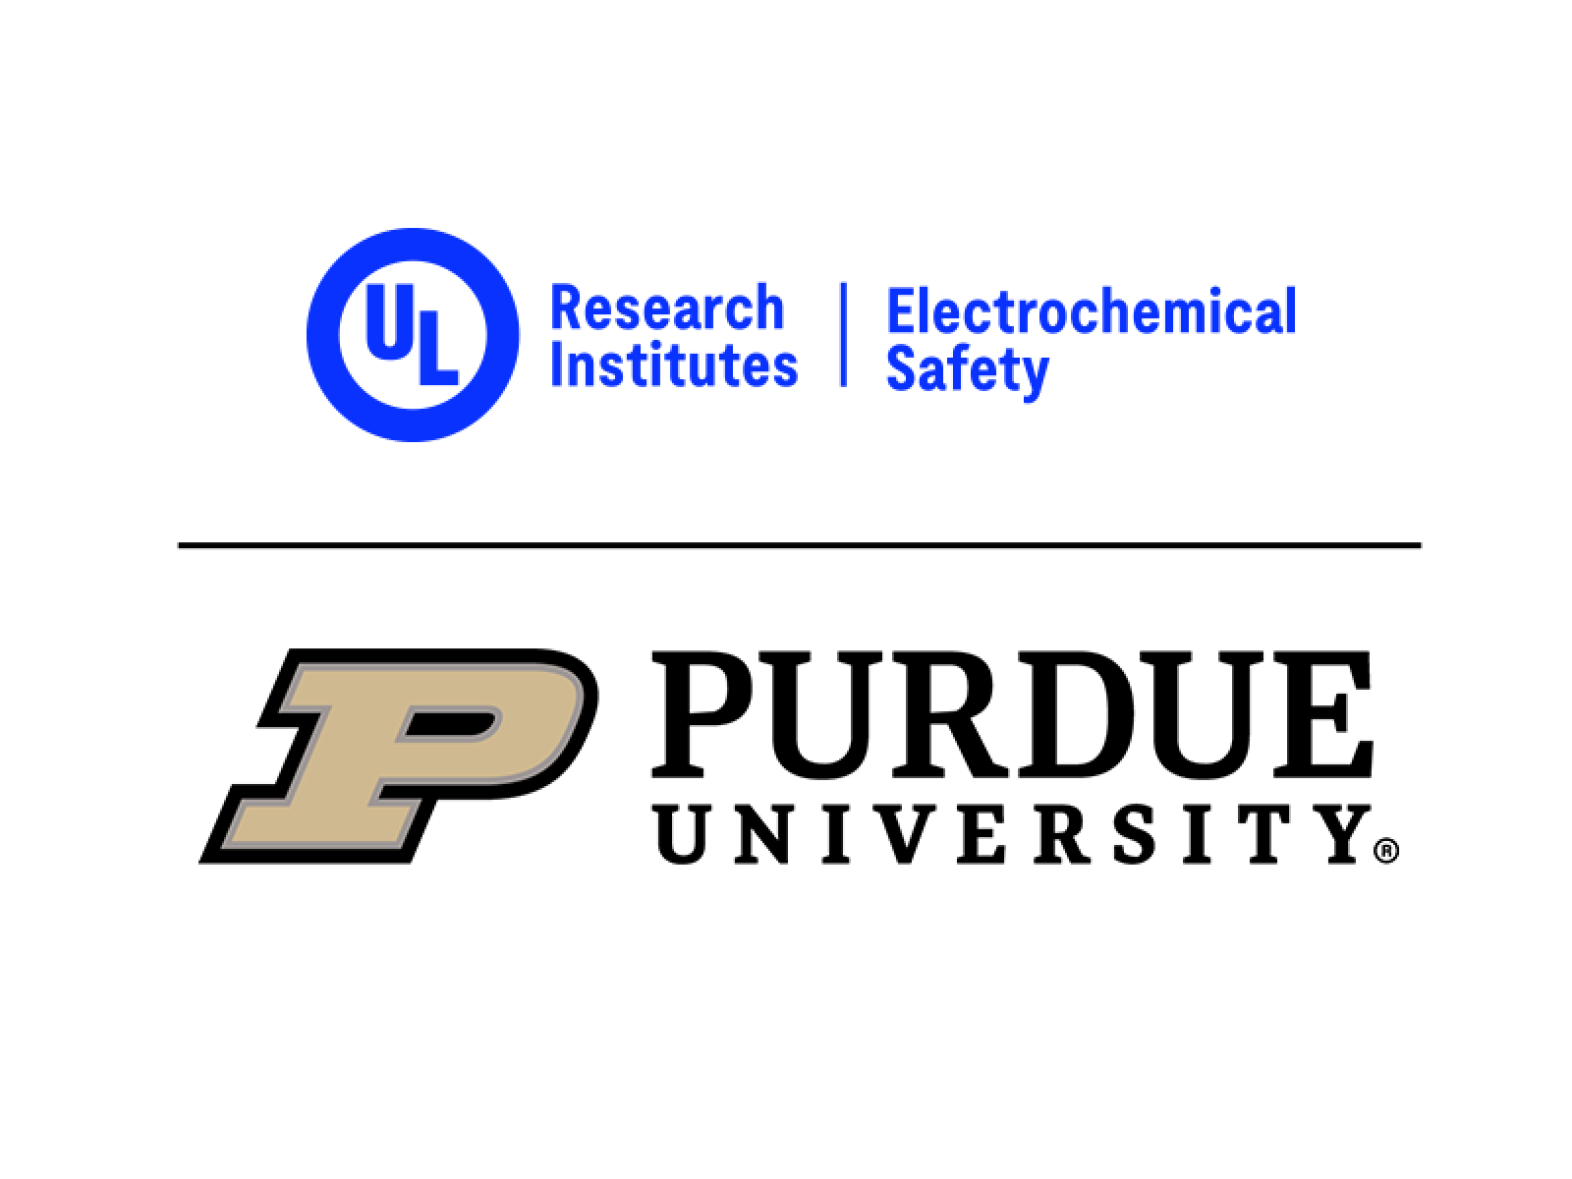 Electrochemical Research Safety Institute and Purdue University